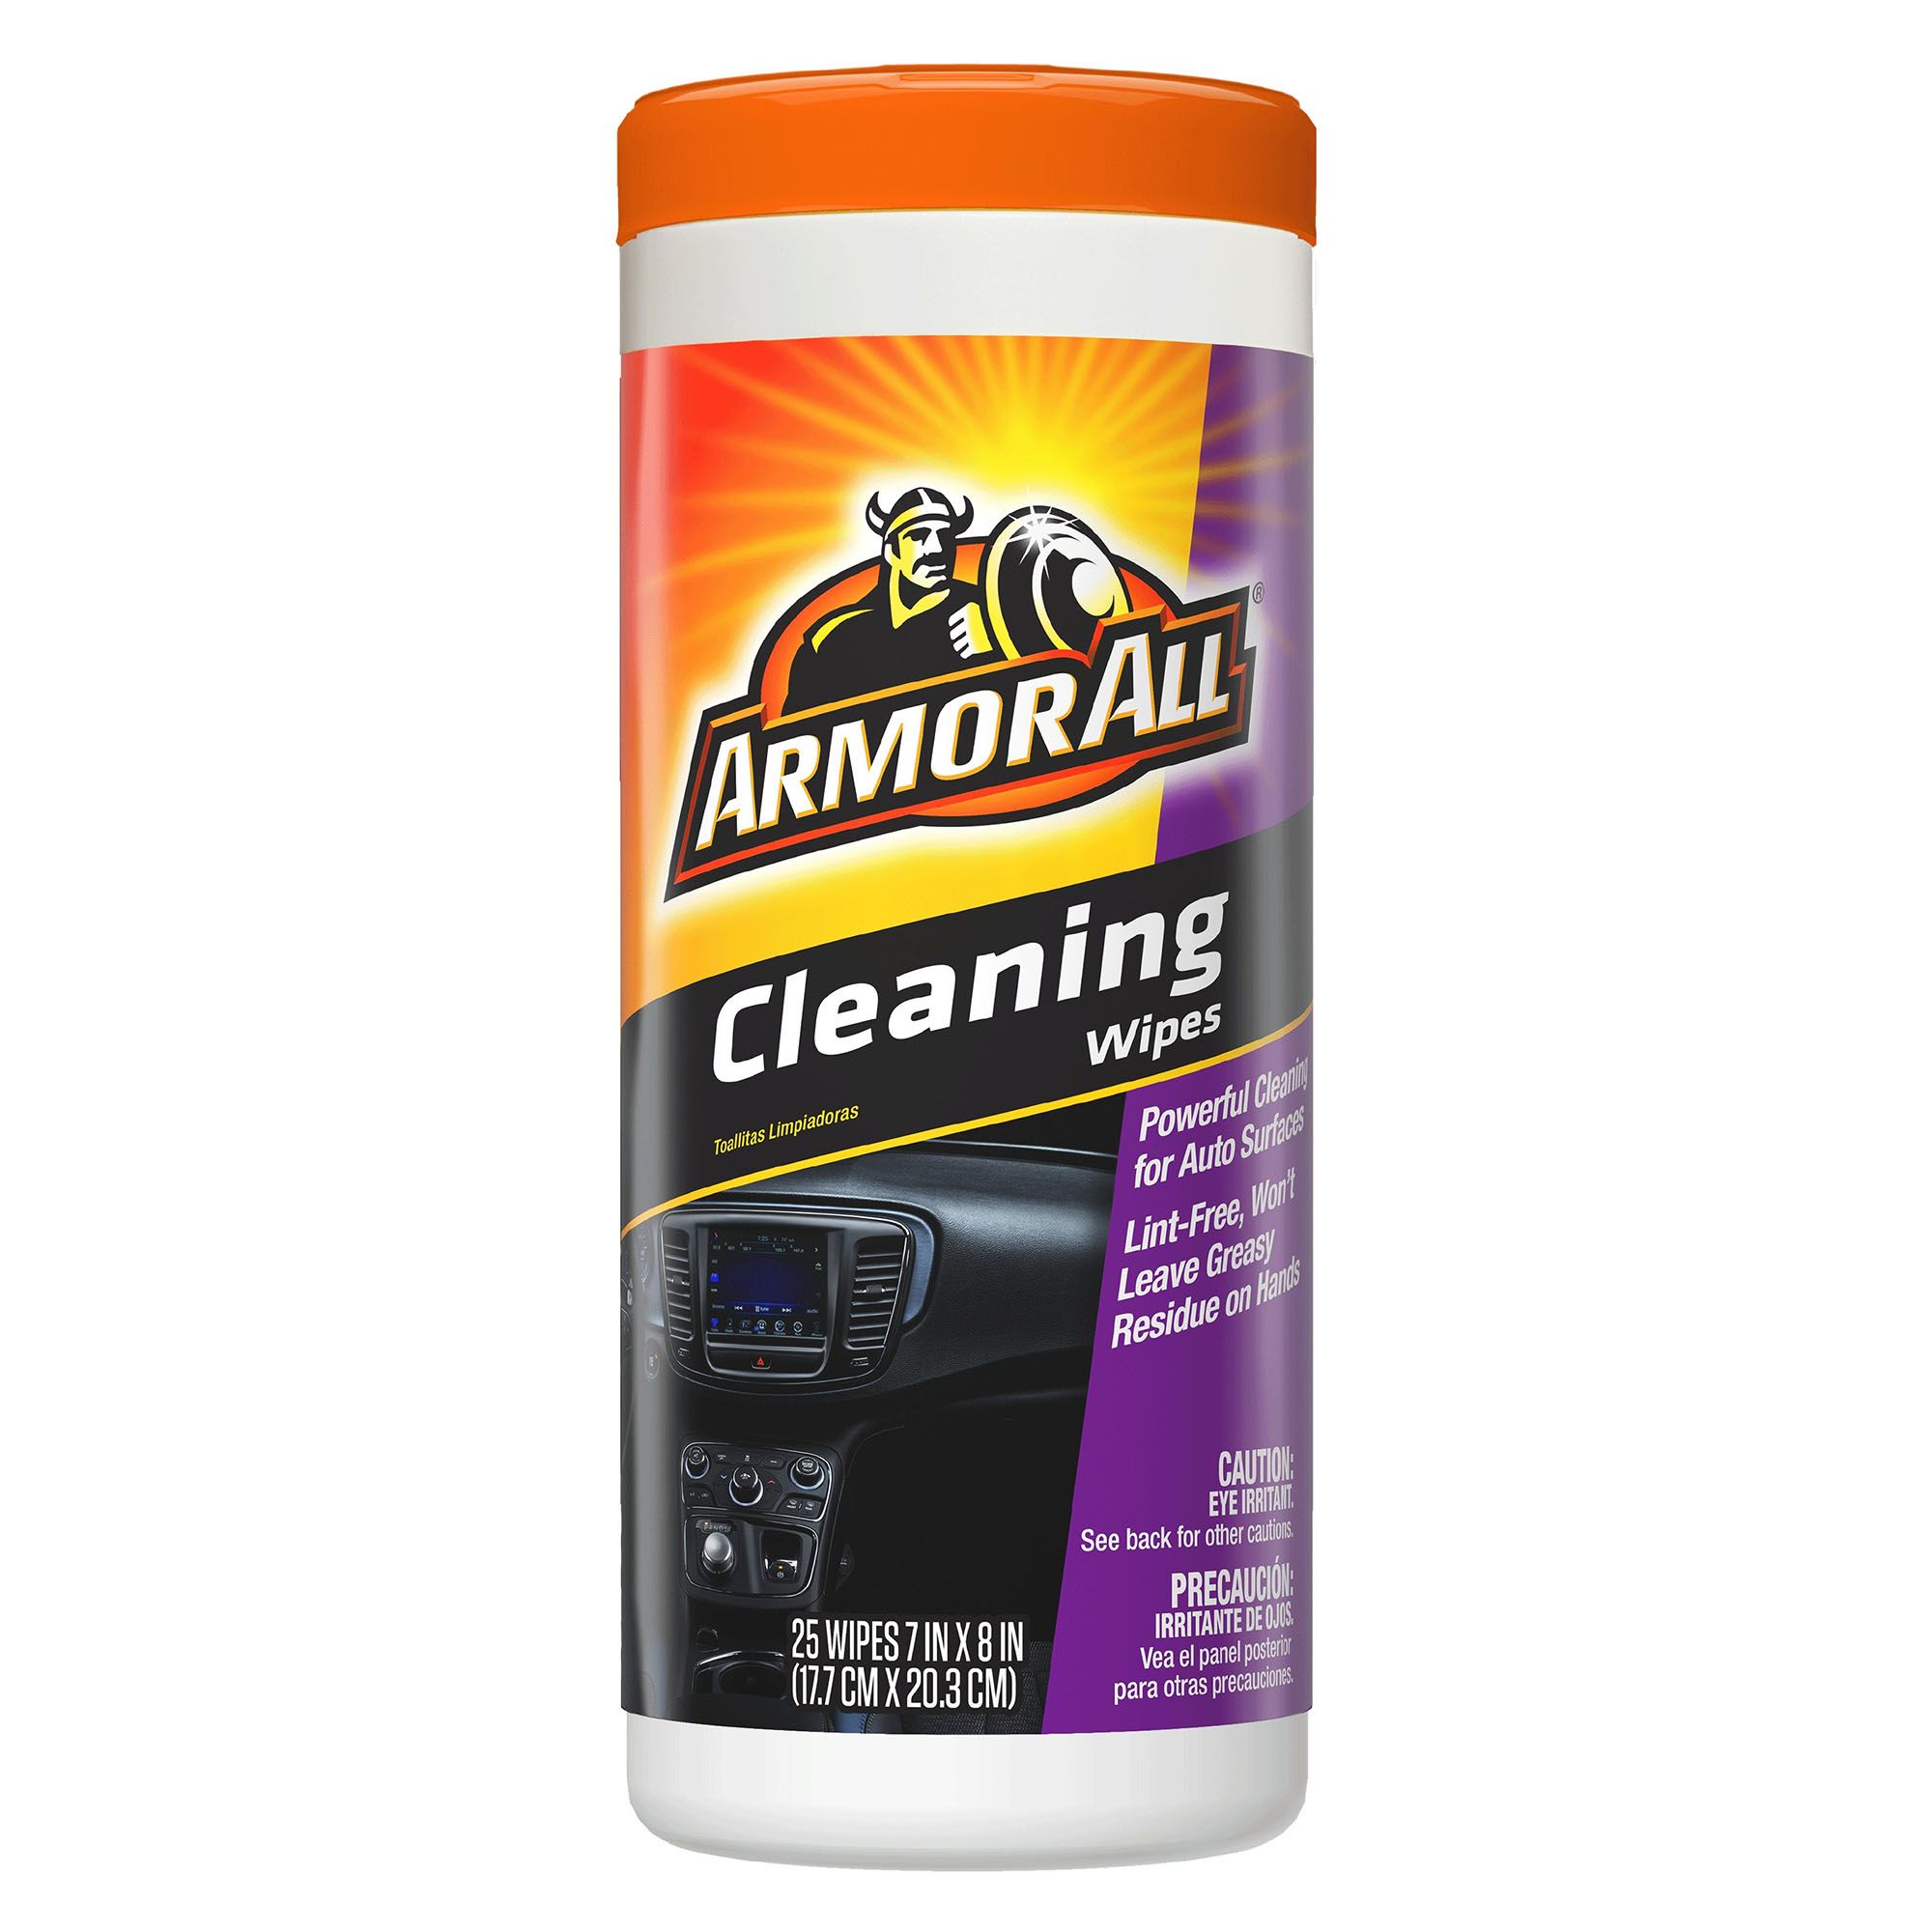 Wholesale car leather cleaning wipes For Refreshing Cleaning 